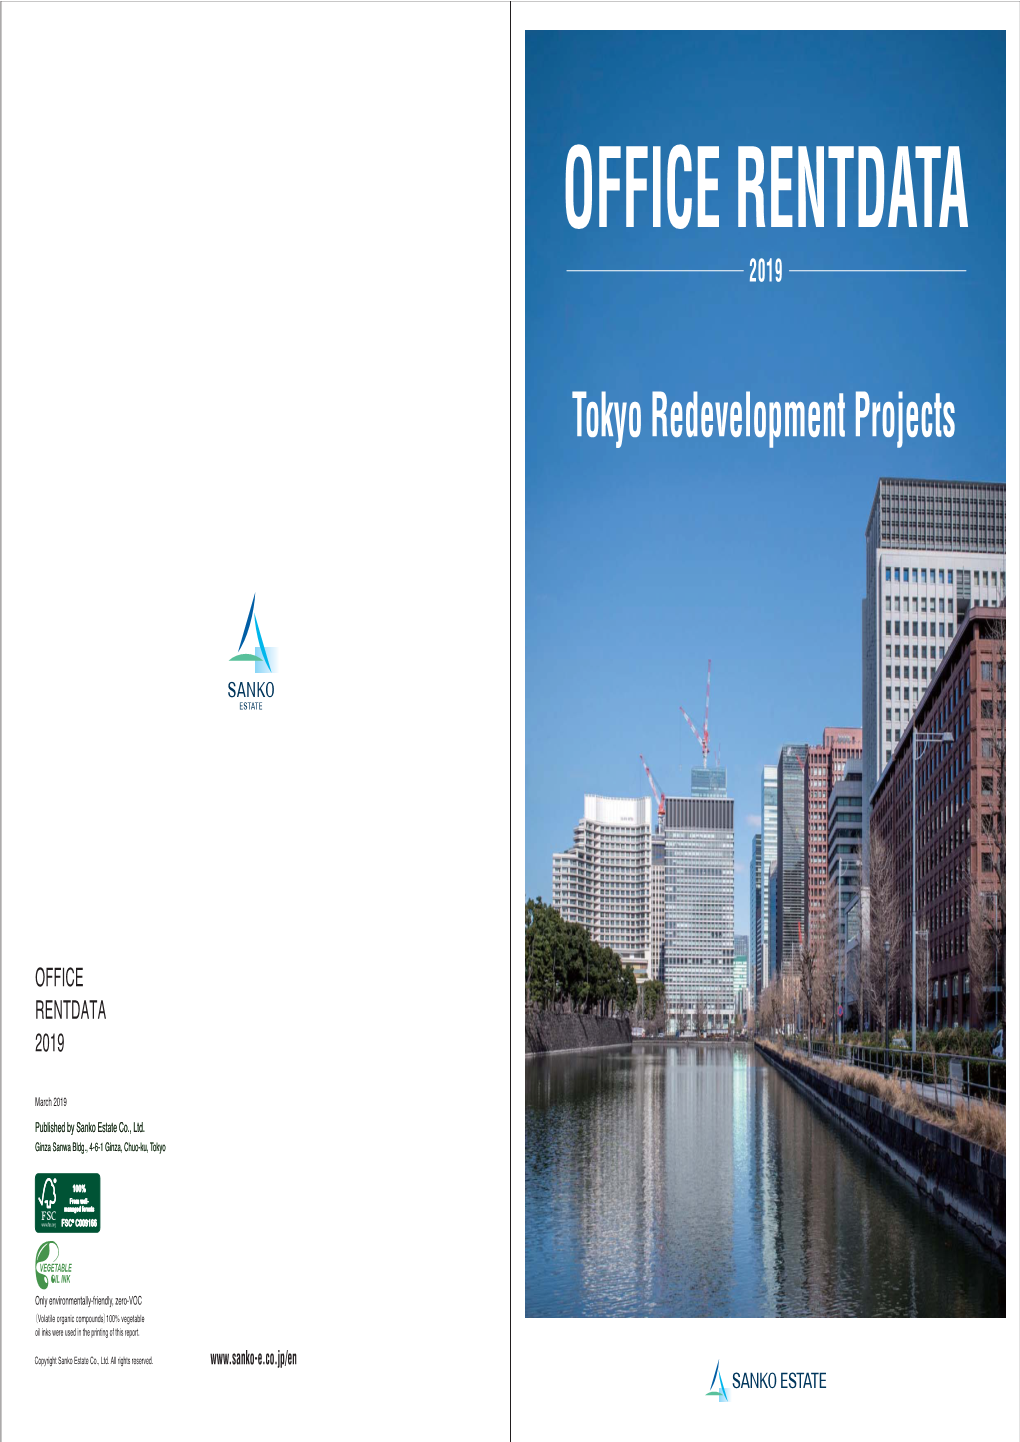 OFFICE RENTDATA 2019 Tokyo Redevelopment Projects